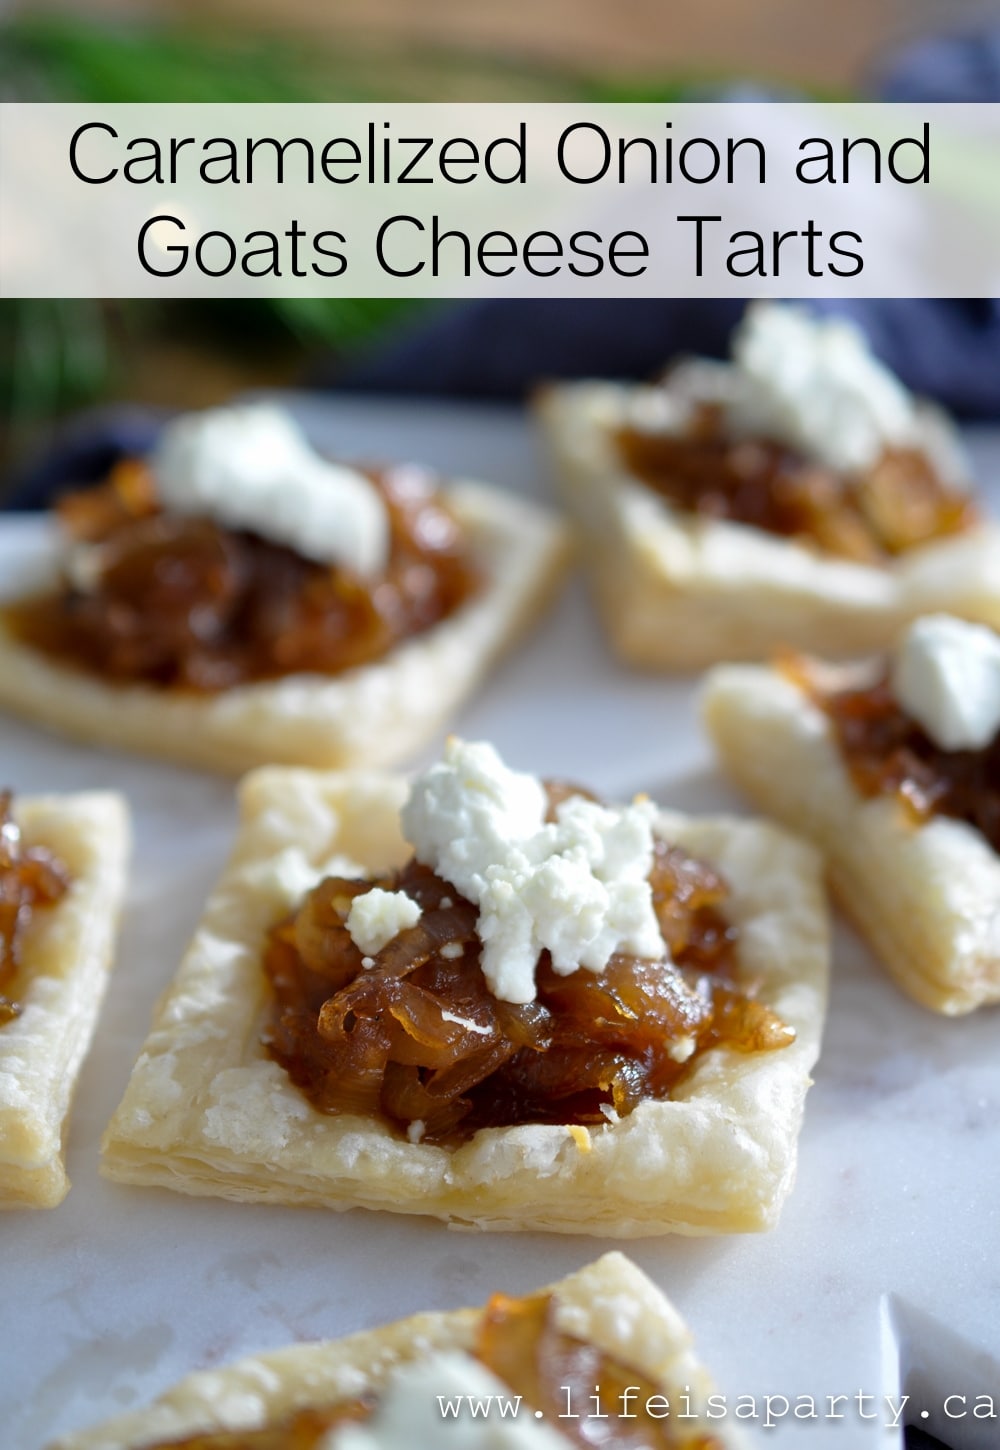 Caramelized Onion and Goats Cheese Tarts